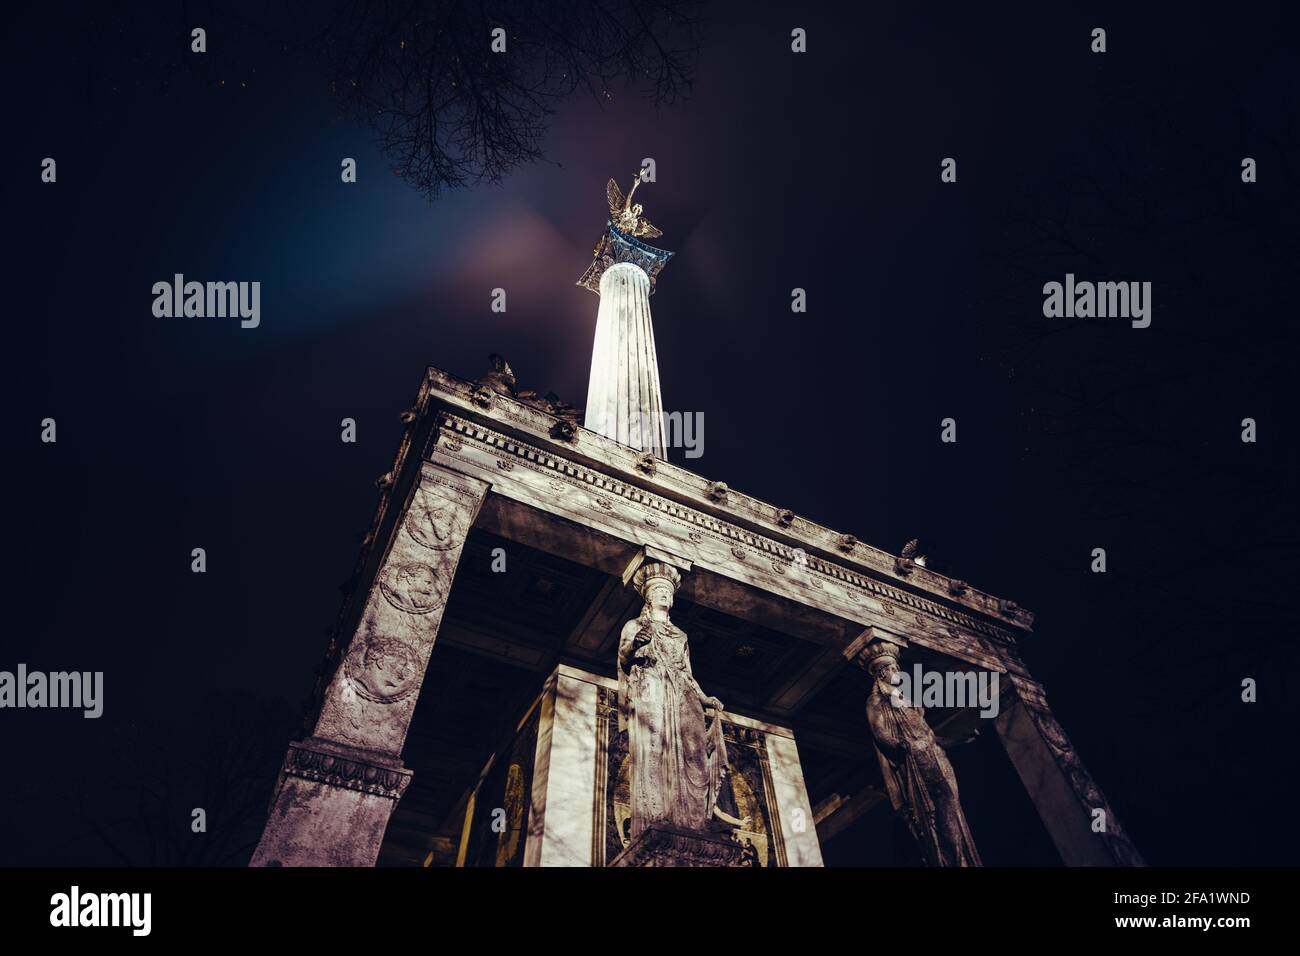 The Friedensengel in Munich by night. A monument with a golden angel on the top, mosaic stones and some statues. Builded during the Barock Epoche. Stock Photo